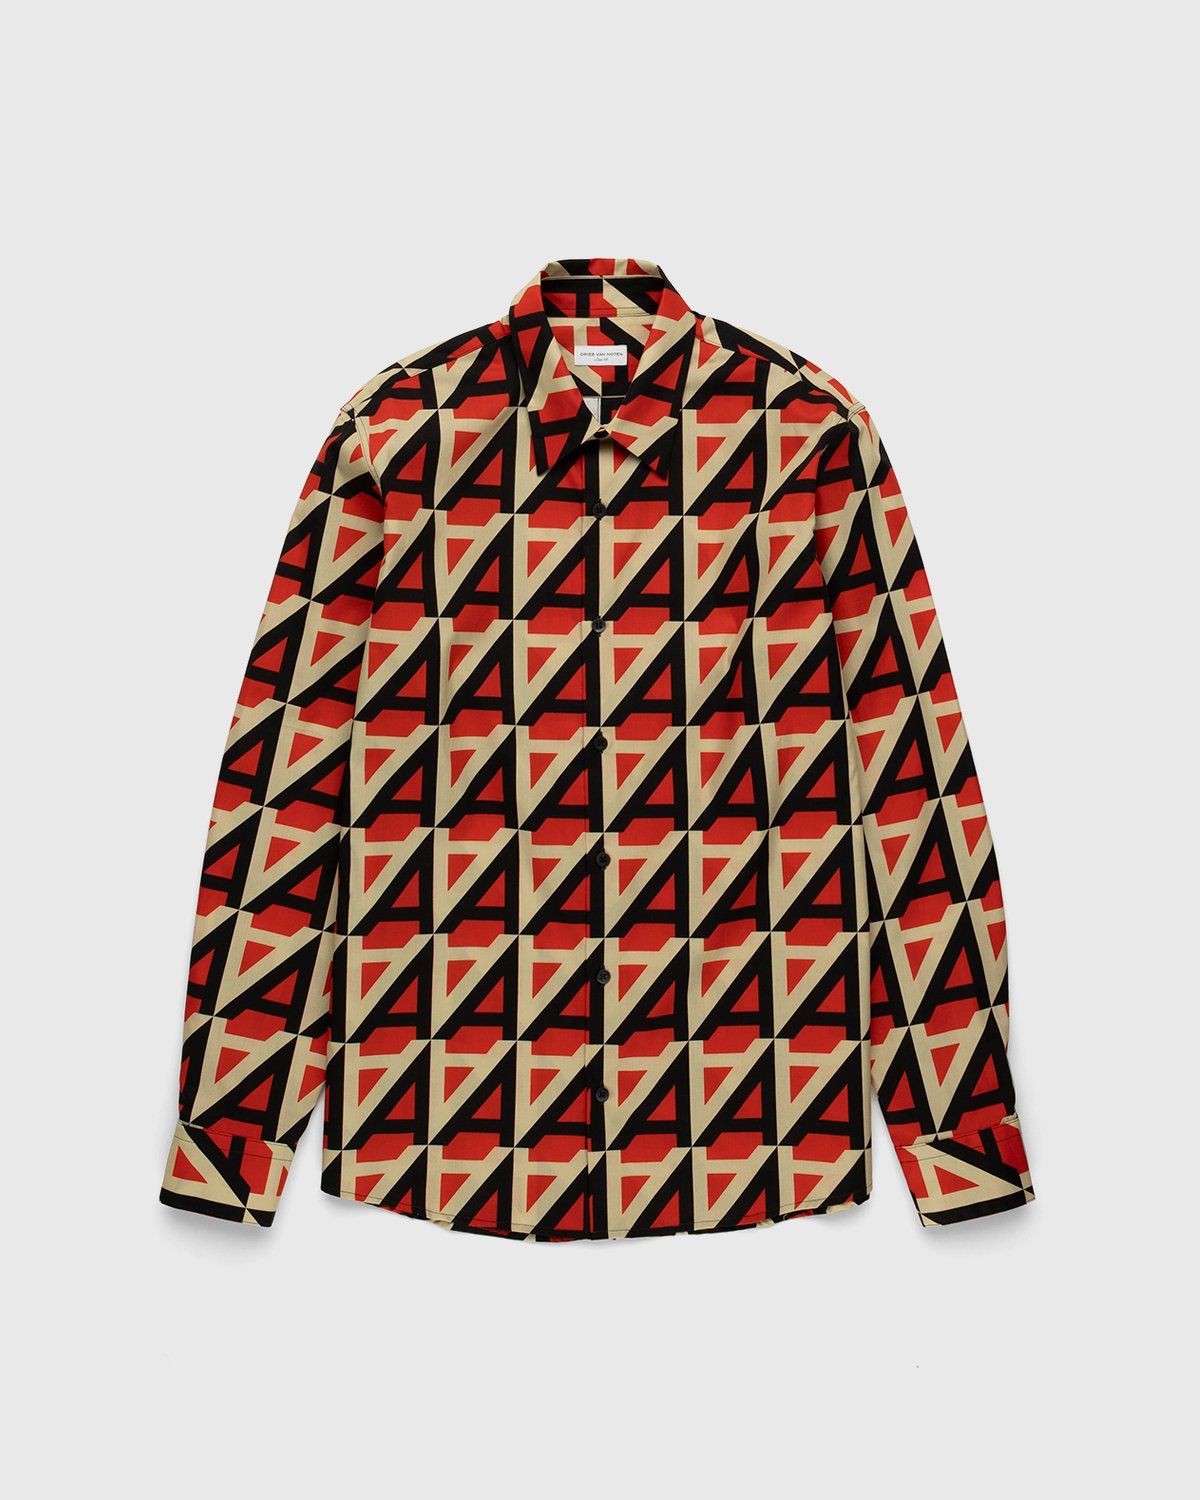 Dries van Noten – Curle "A" Shirt Red - Shirts - Red - Image 1